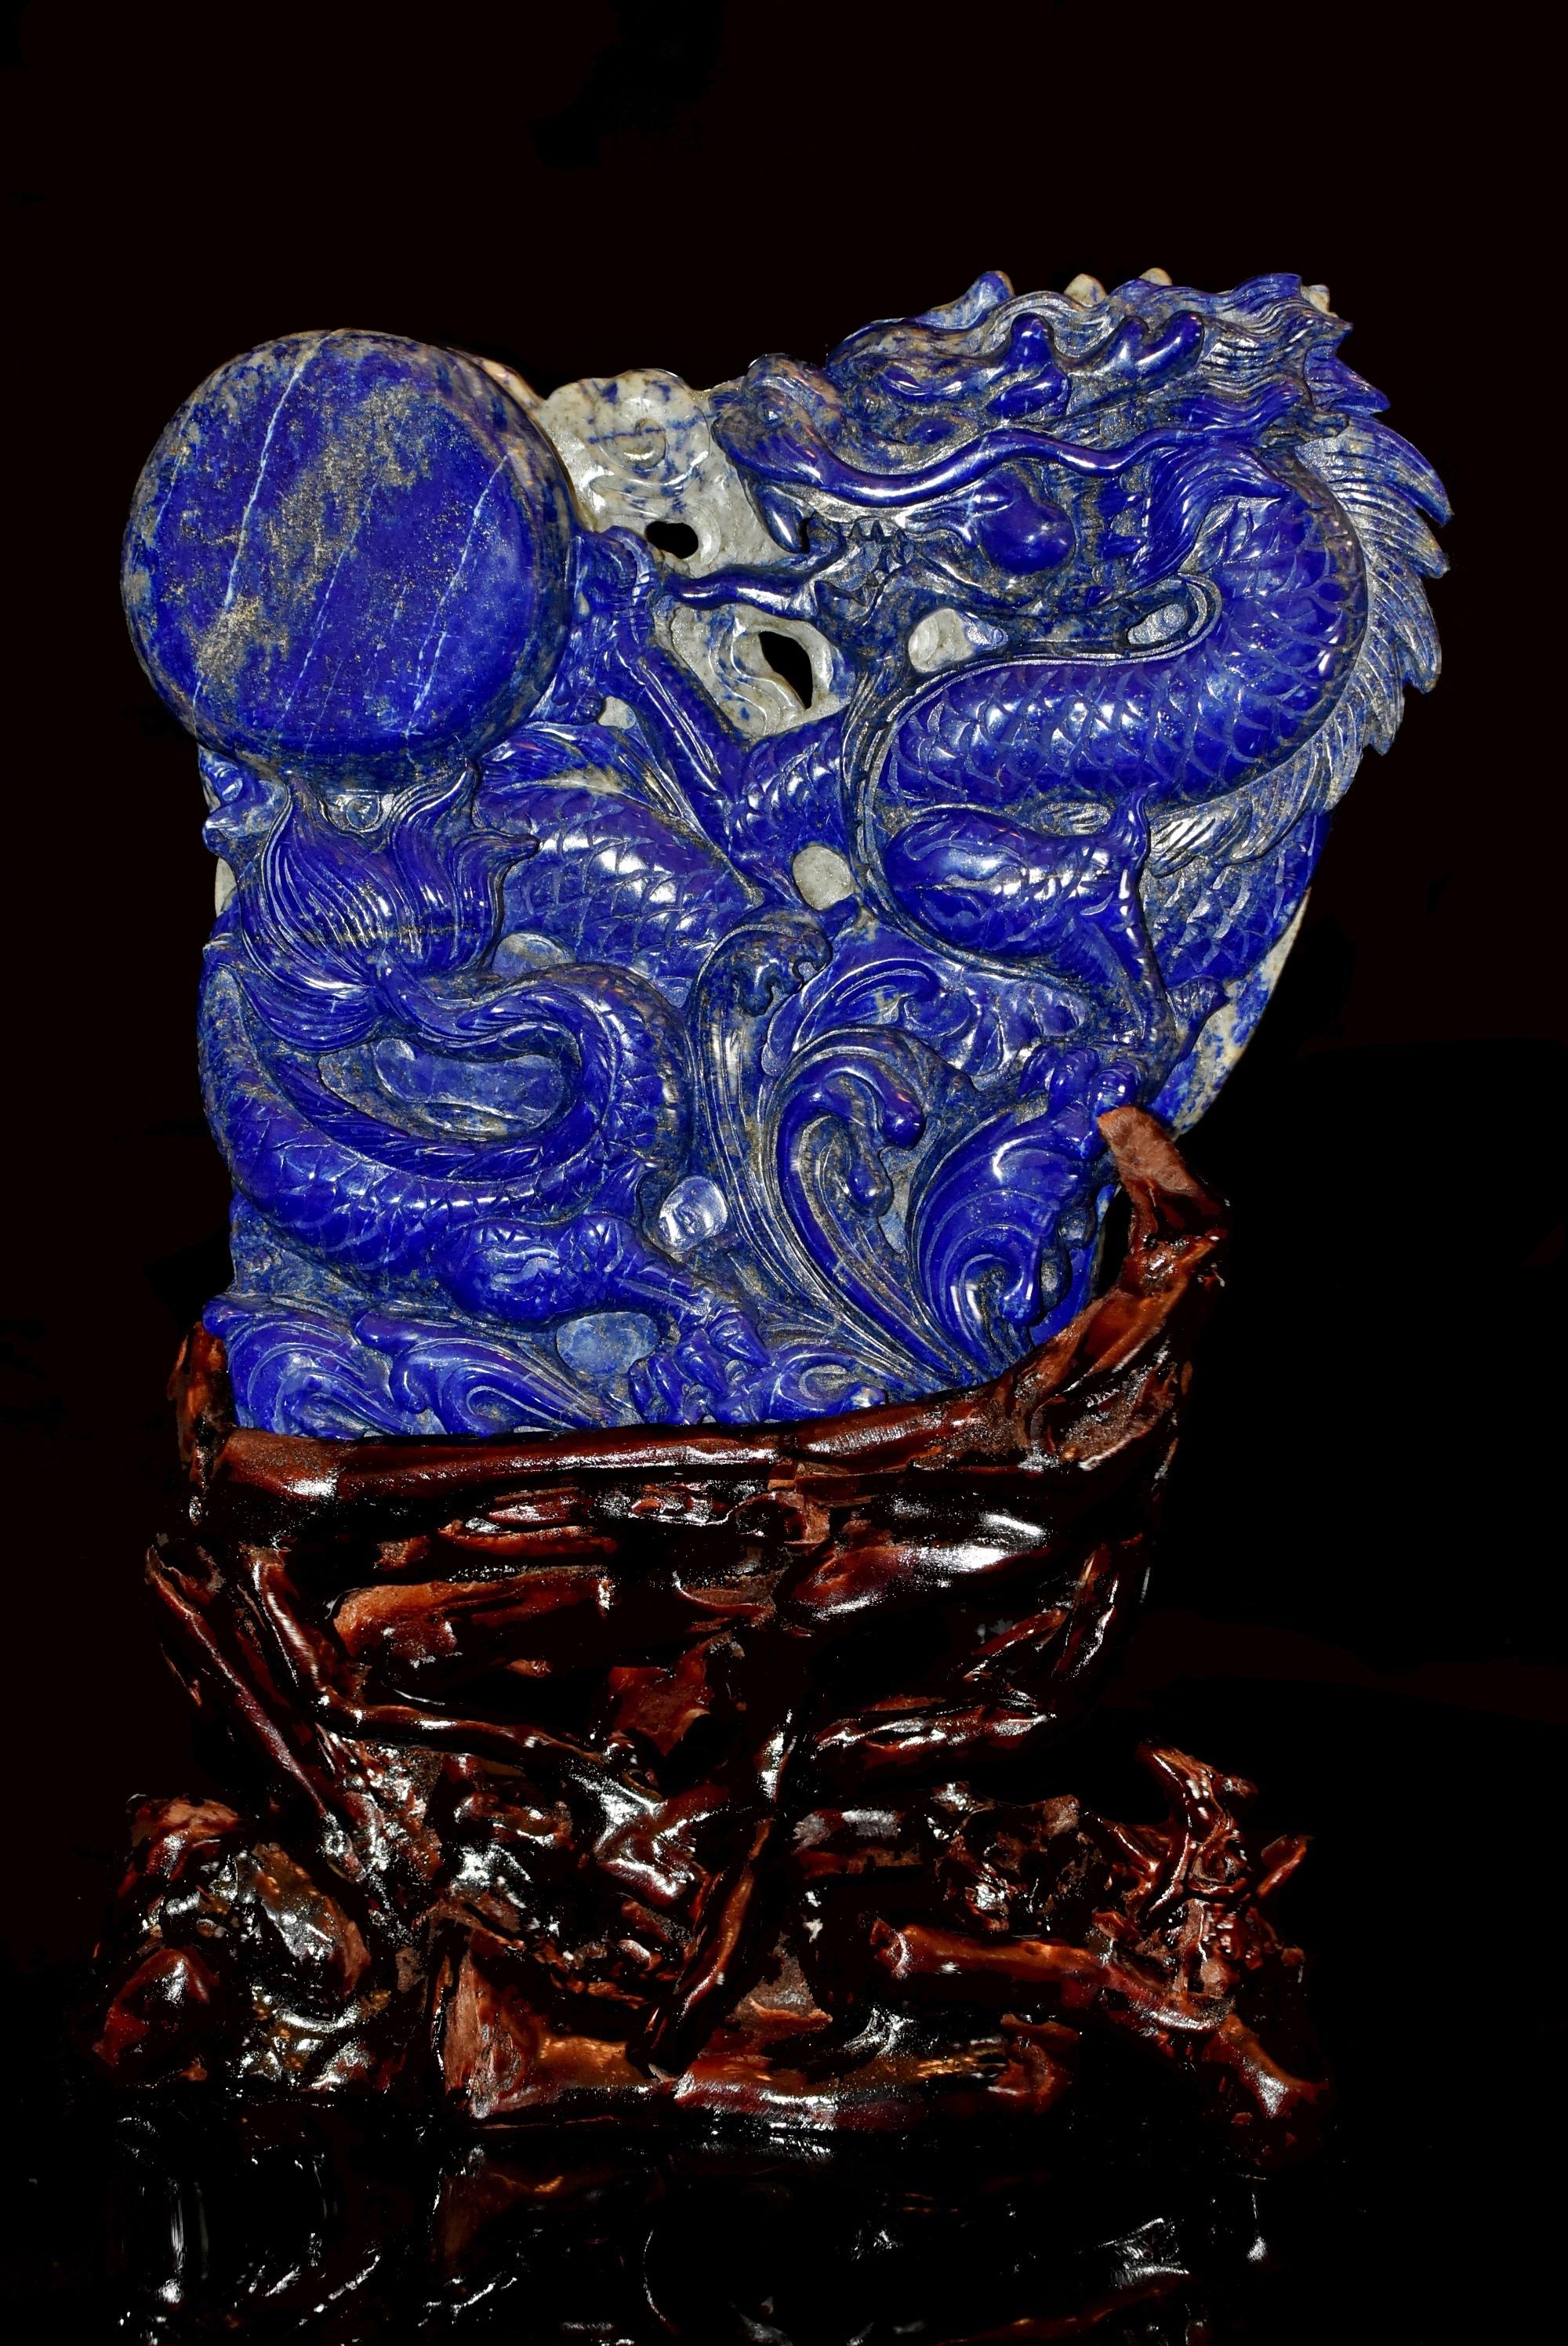 A beautiful large statue of an upright dragon chasing pearl, hand carved out of natural Fine grade lapis lazuli weighing 4.5 lb. Masterful depiction of the dragon with its deep scales, gaping mouth, bulging eyes and vivid expression. A symbol of